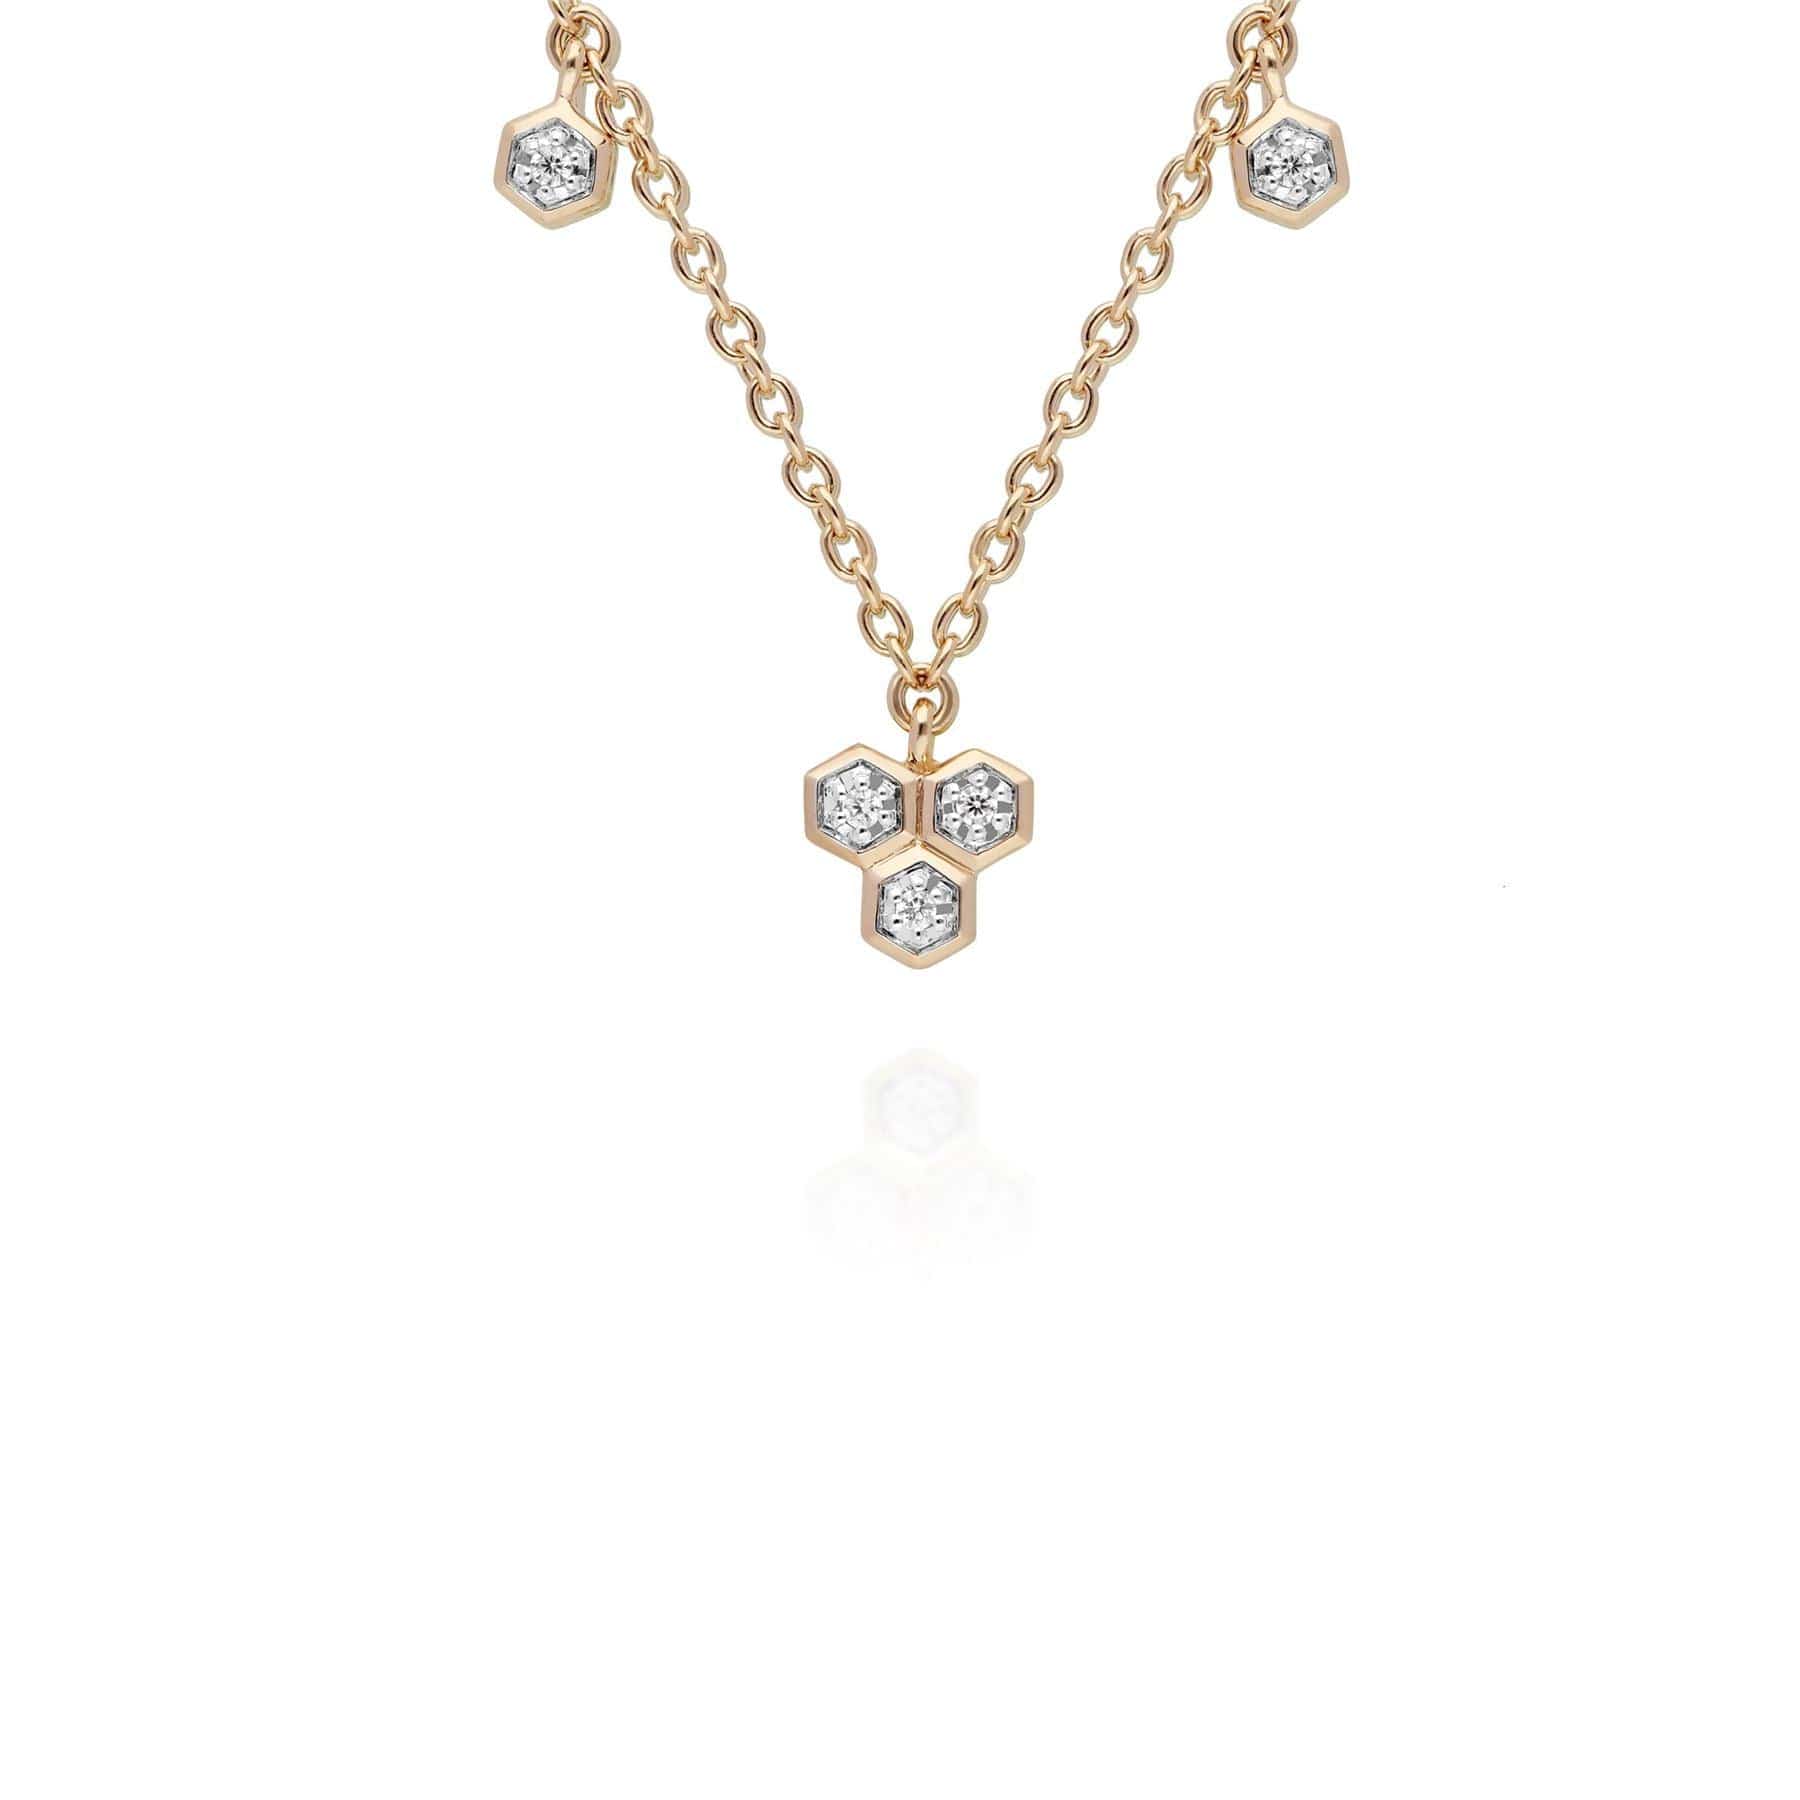 191N0229019-191E0398019 Diamond Trilogy Necklace & Stud Earring Set in 9ct Yellow Gold 2